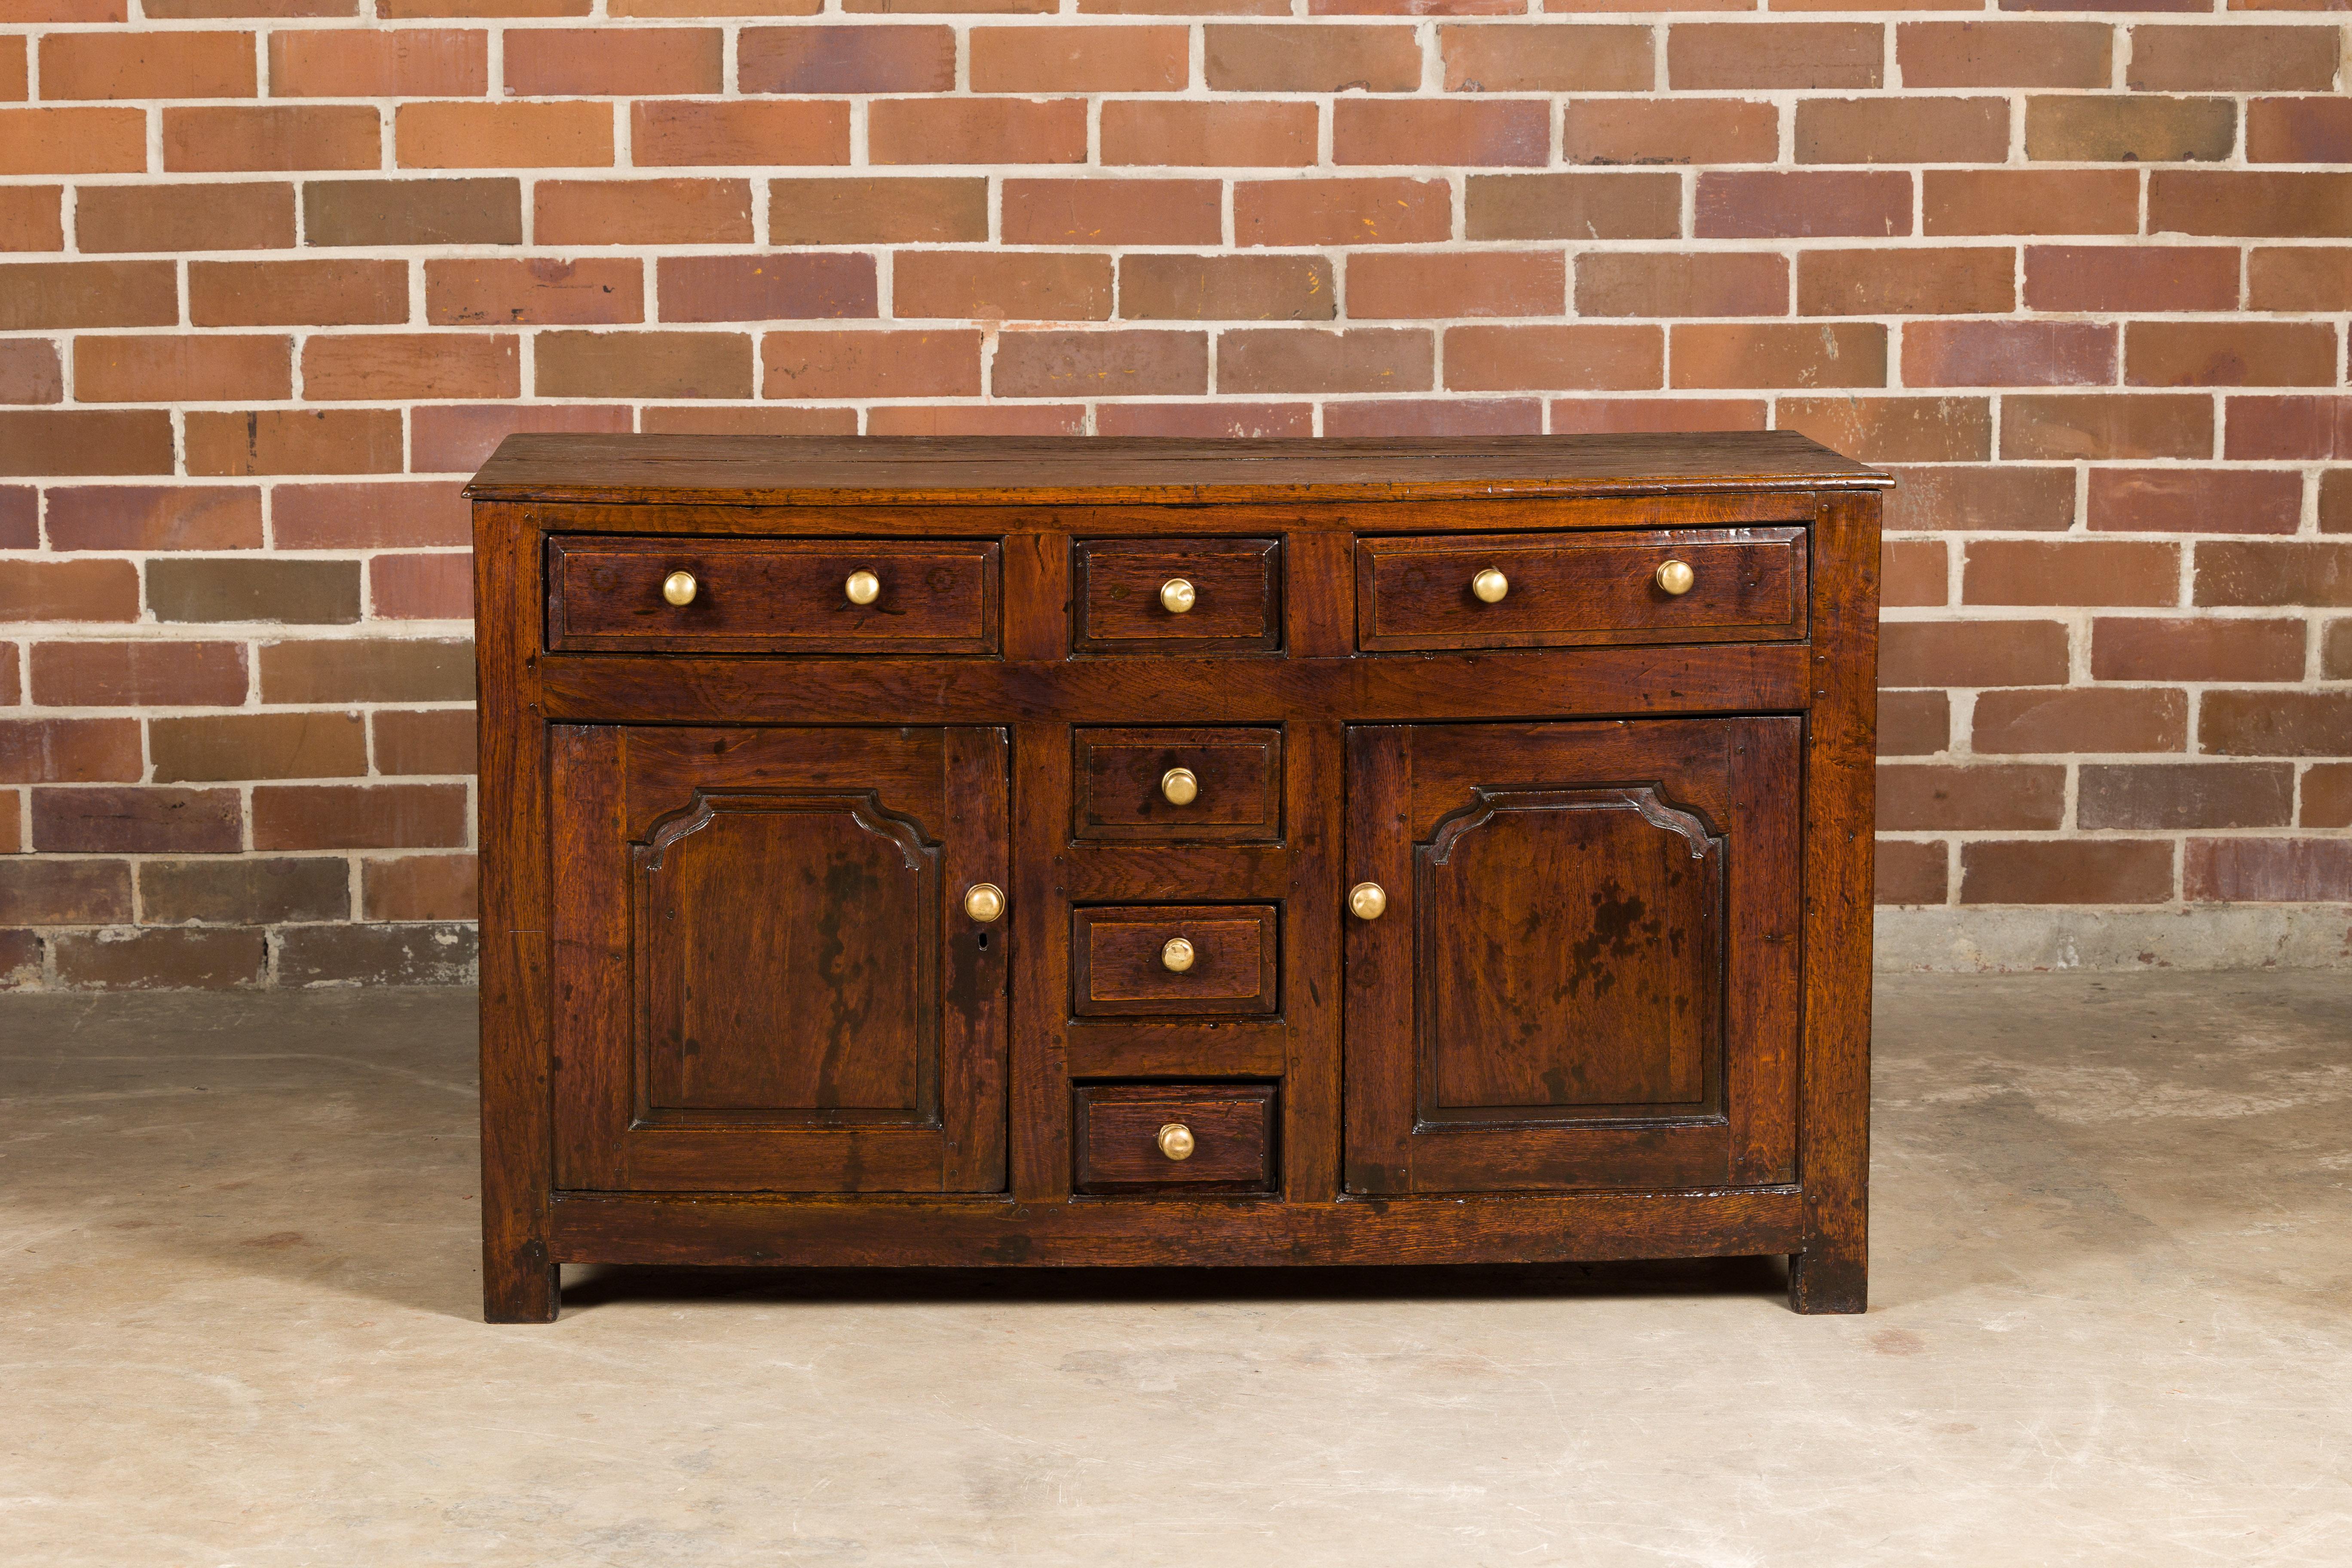 An English George III period oak buffet from circa 1800 with six drawers, two doors and nice patina. Step back into the timeless elegance of early 19th-century England with this George III period oak buffet. Originating circa 1800, its enduring